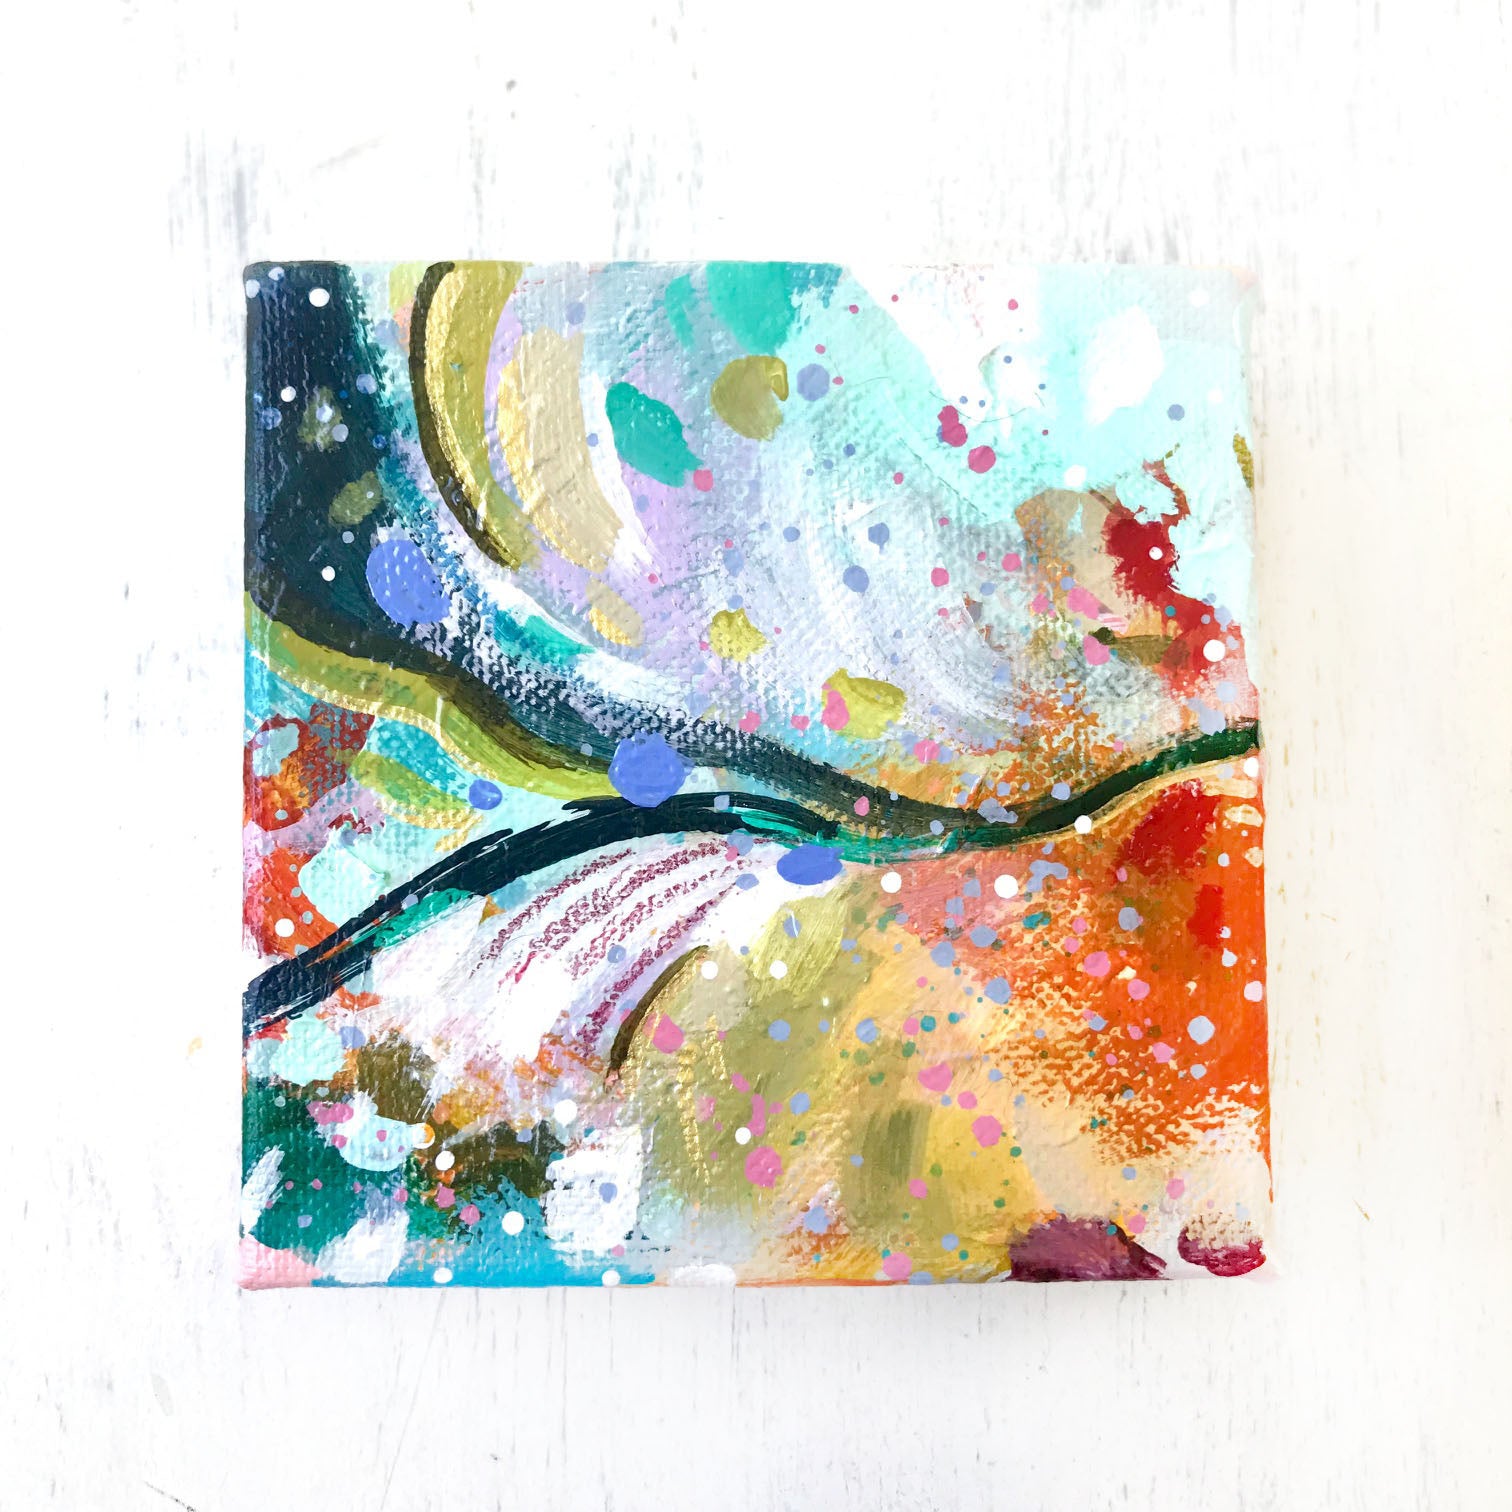 Abstract Original Painting "Shimmering Skies" 4x4 inch Gallery Wrapped Canvas - Bethany Joy Art